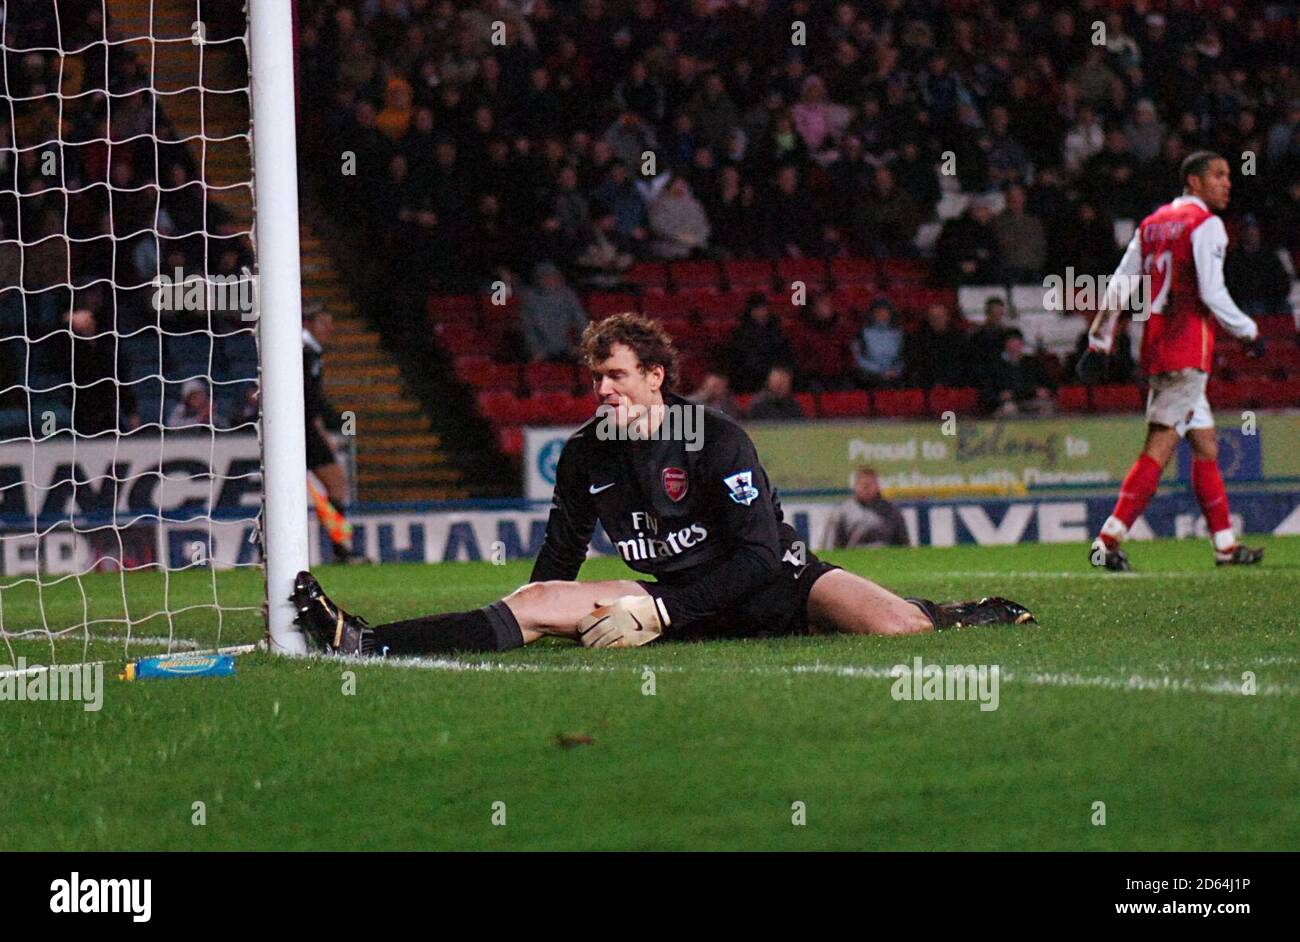 Arsenal goalkeeper Jens Lehmann (center) stretches to make a save to deny Blackburn Rovers Stock Photo